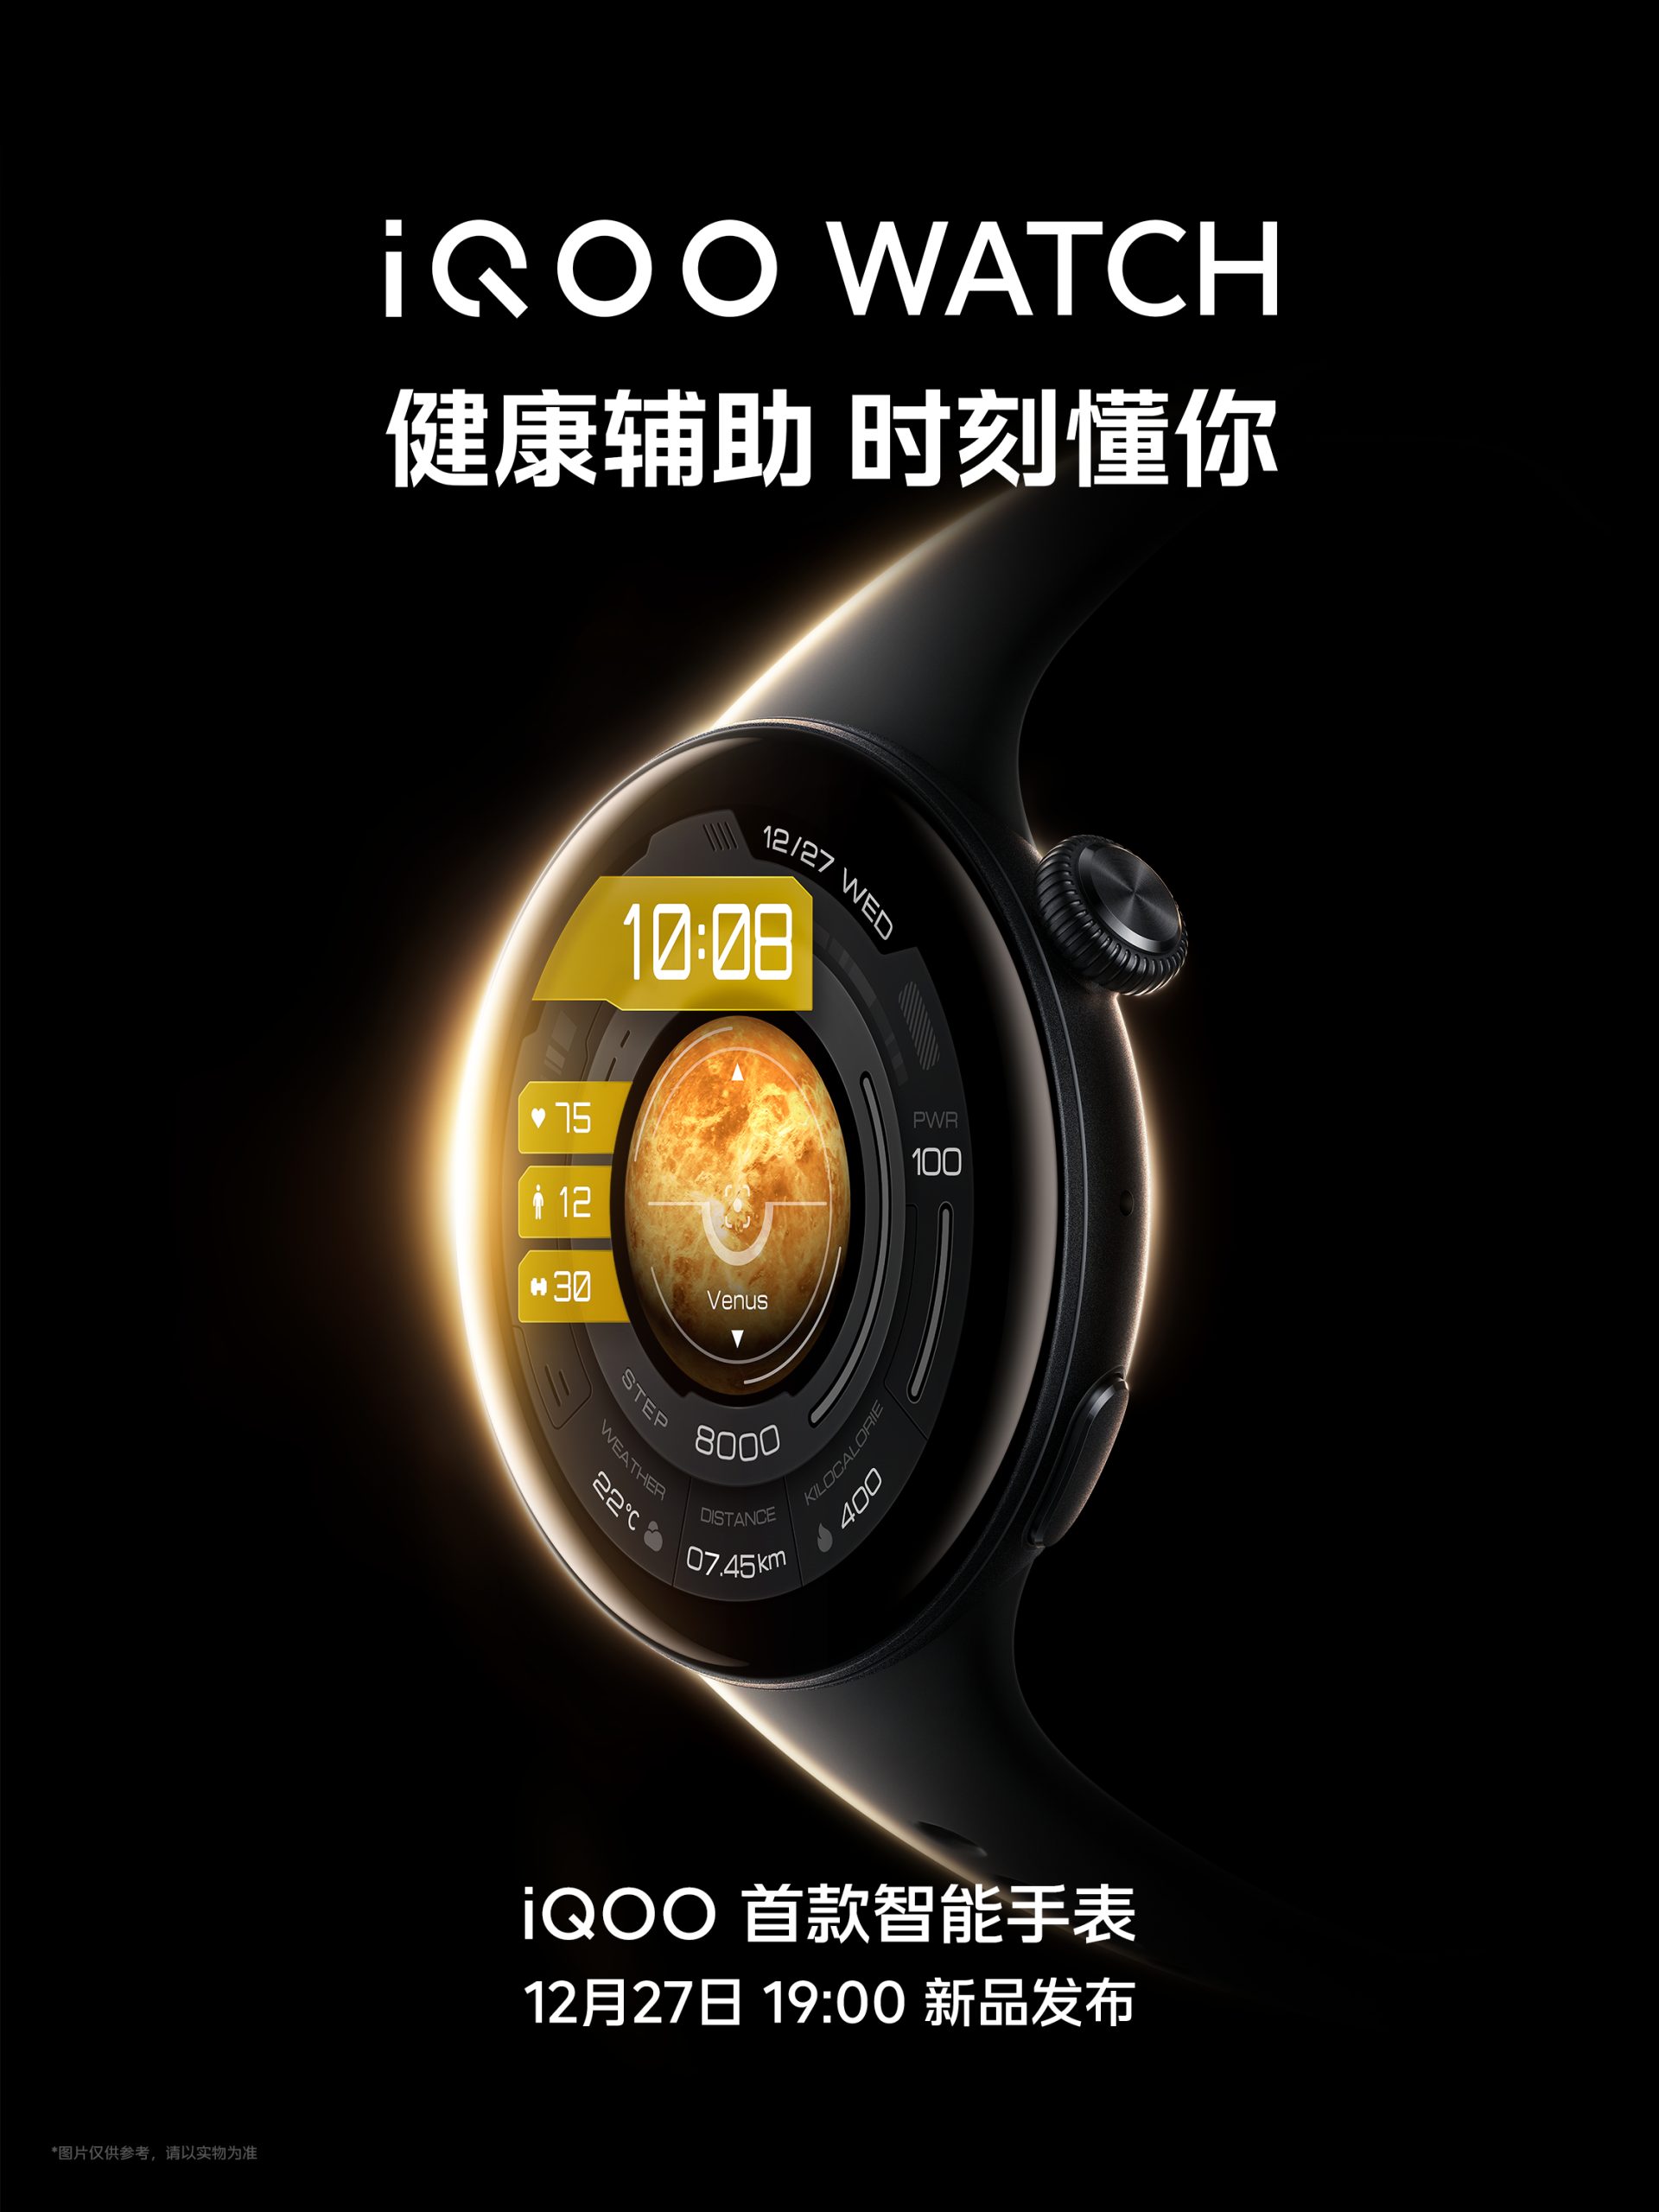 iQOO Watch, iQOO TWS 1e are set to launch on 27th December in China